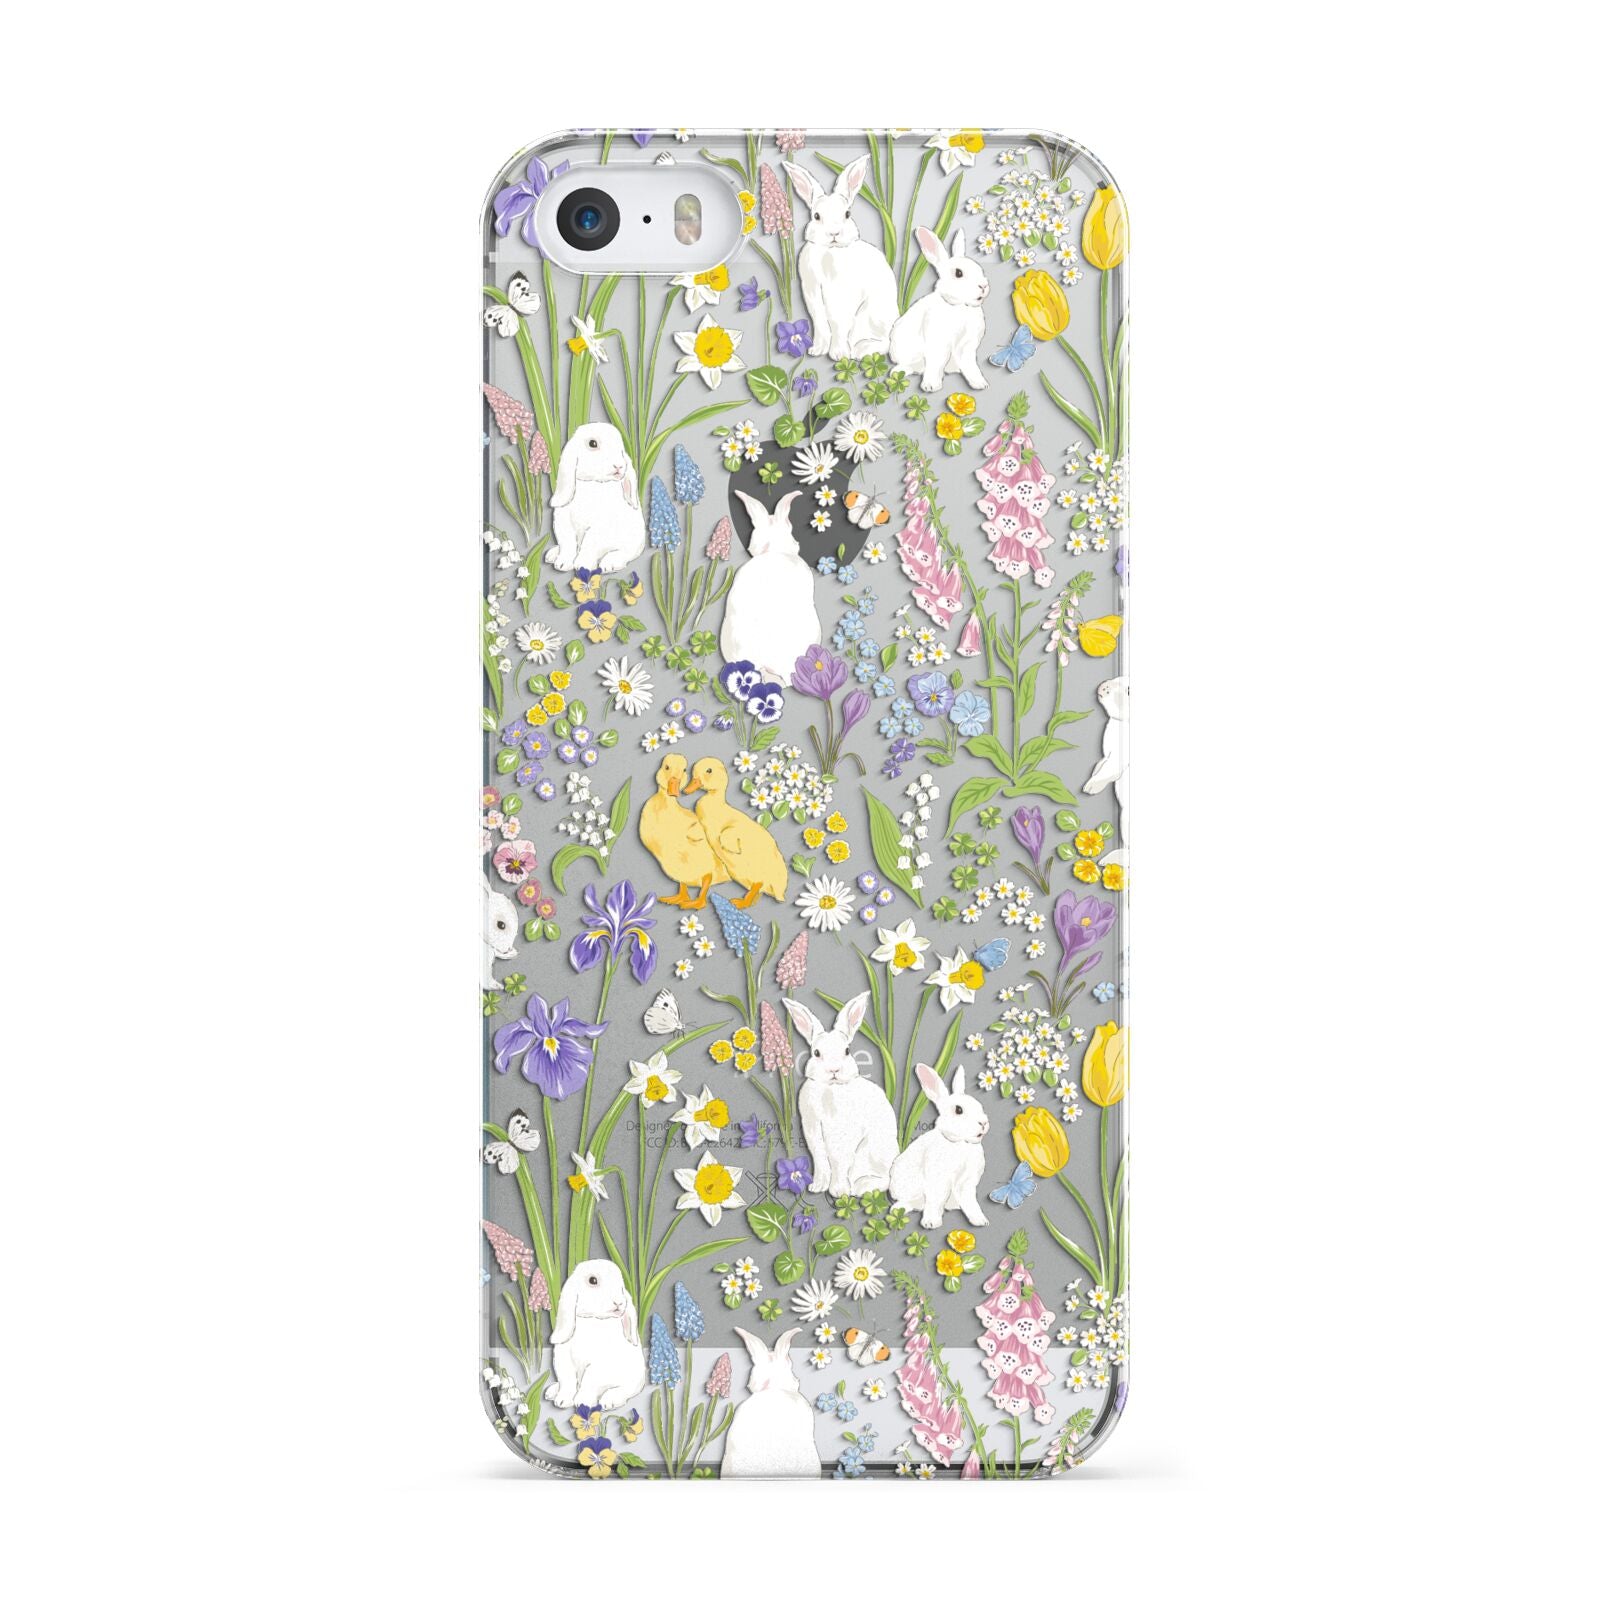 Easter Apple iPhone 5 Case